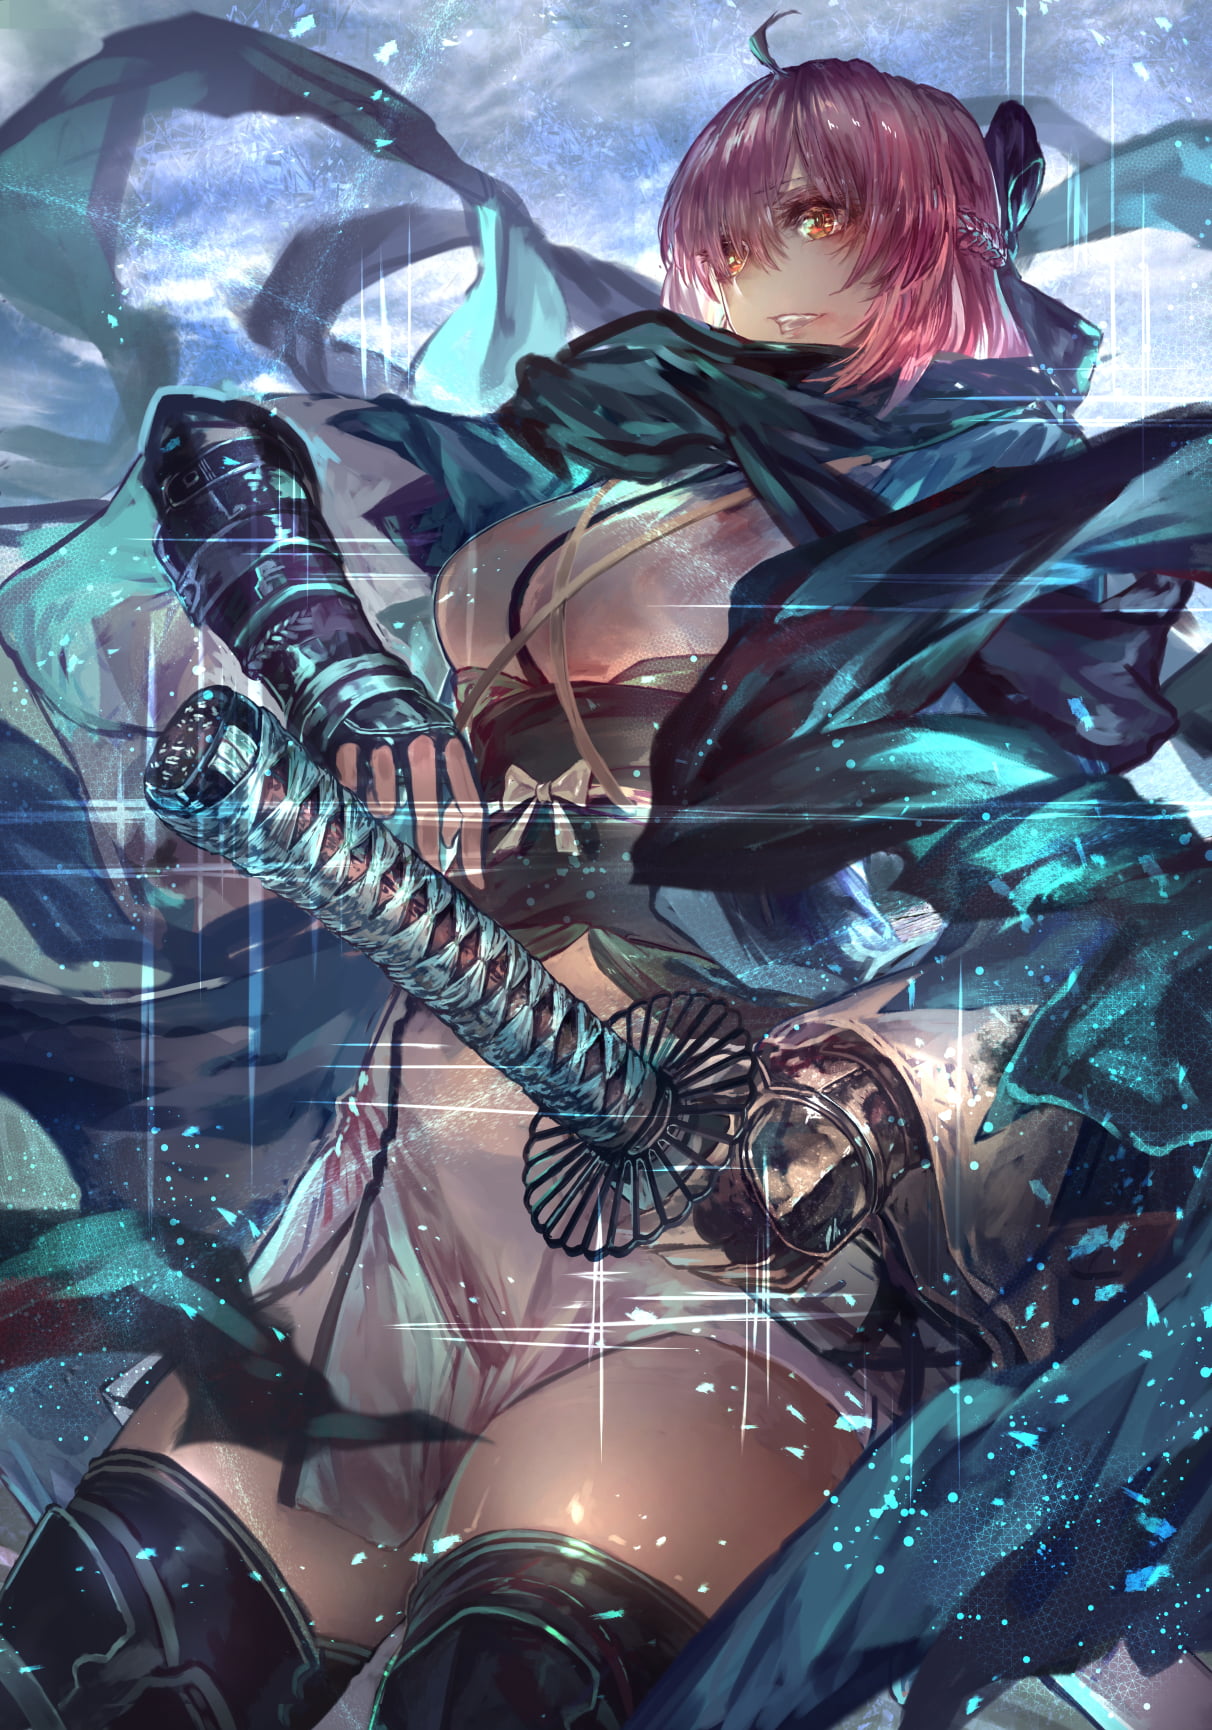 Pink Haired Female Anime Character Fate Series Fate Grand Order Fou Fate Grand Order Signo a Hd Wallpaper Wallpaper Flare